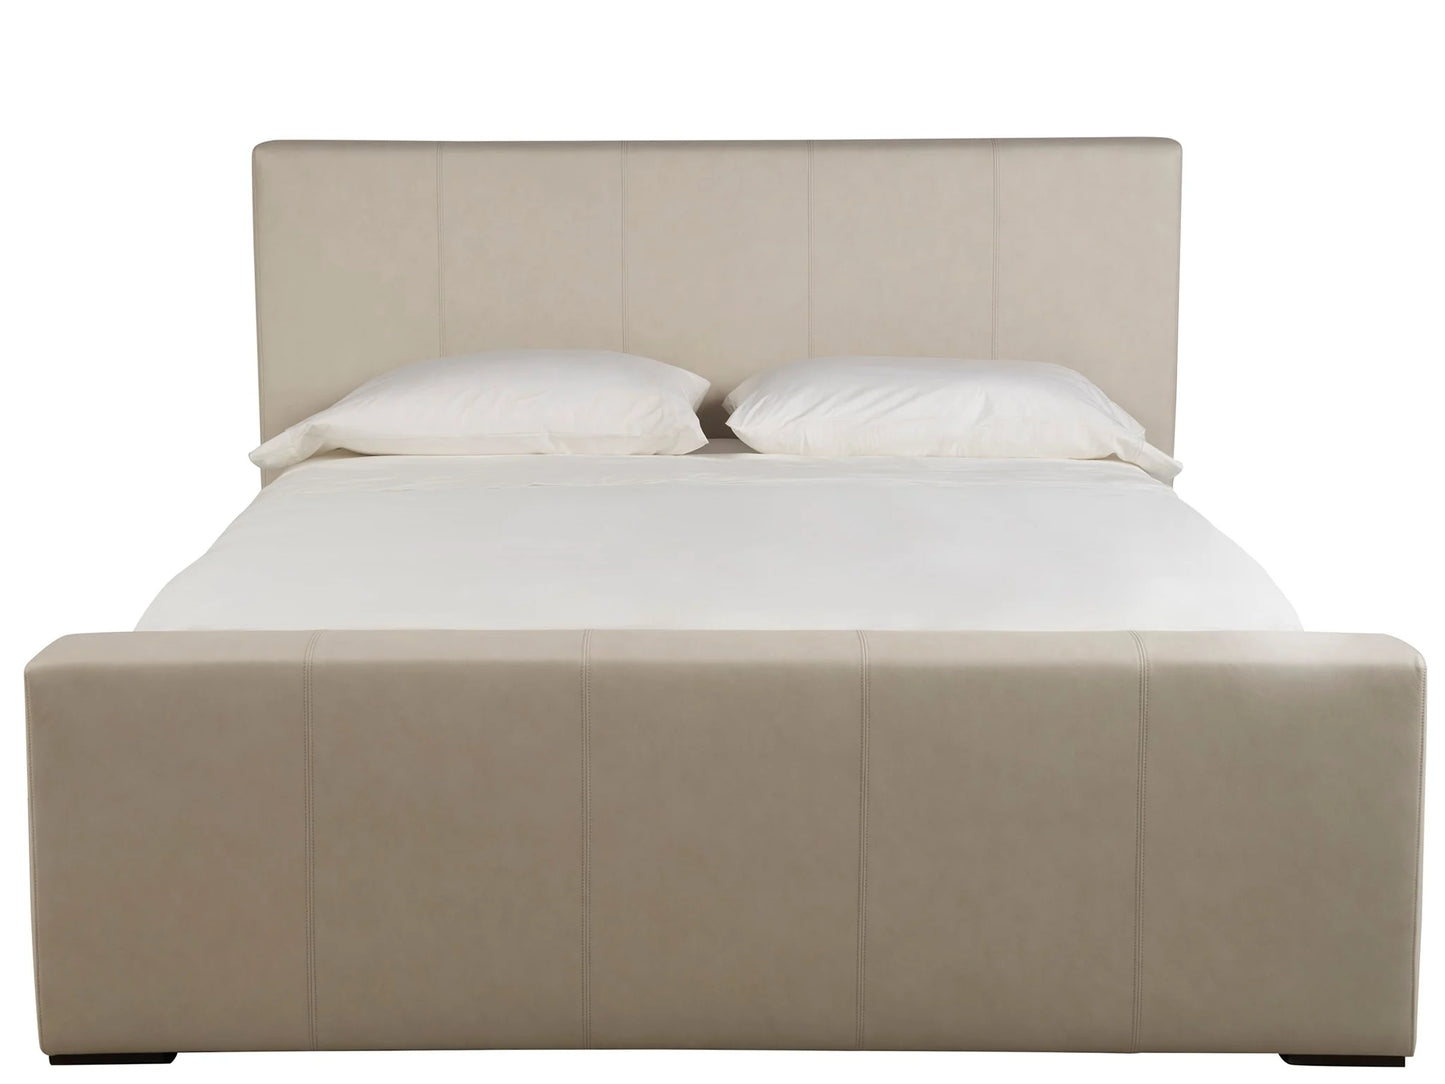 UNIVERSAL - NEW MODERN BOWIE BED KING